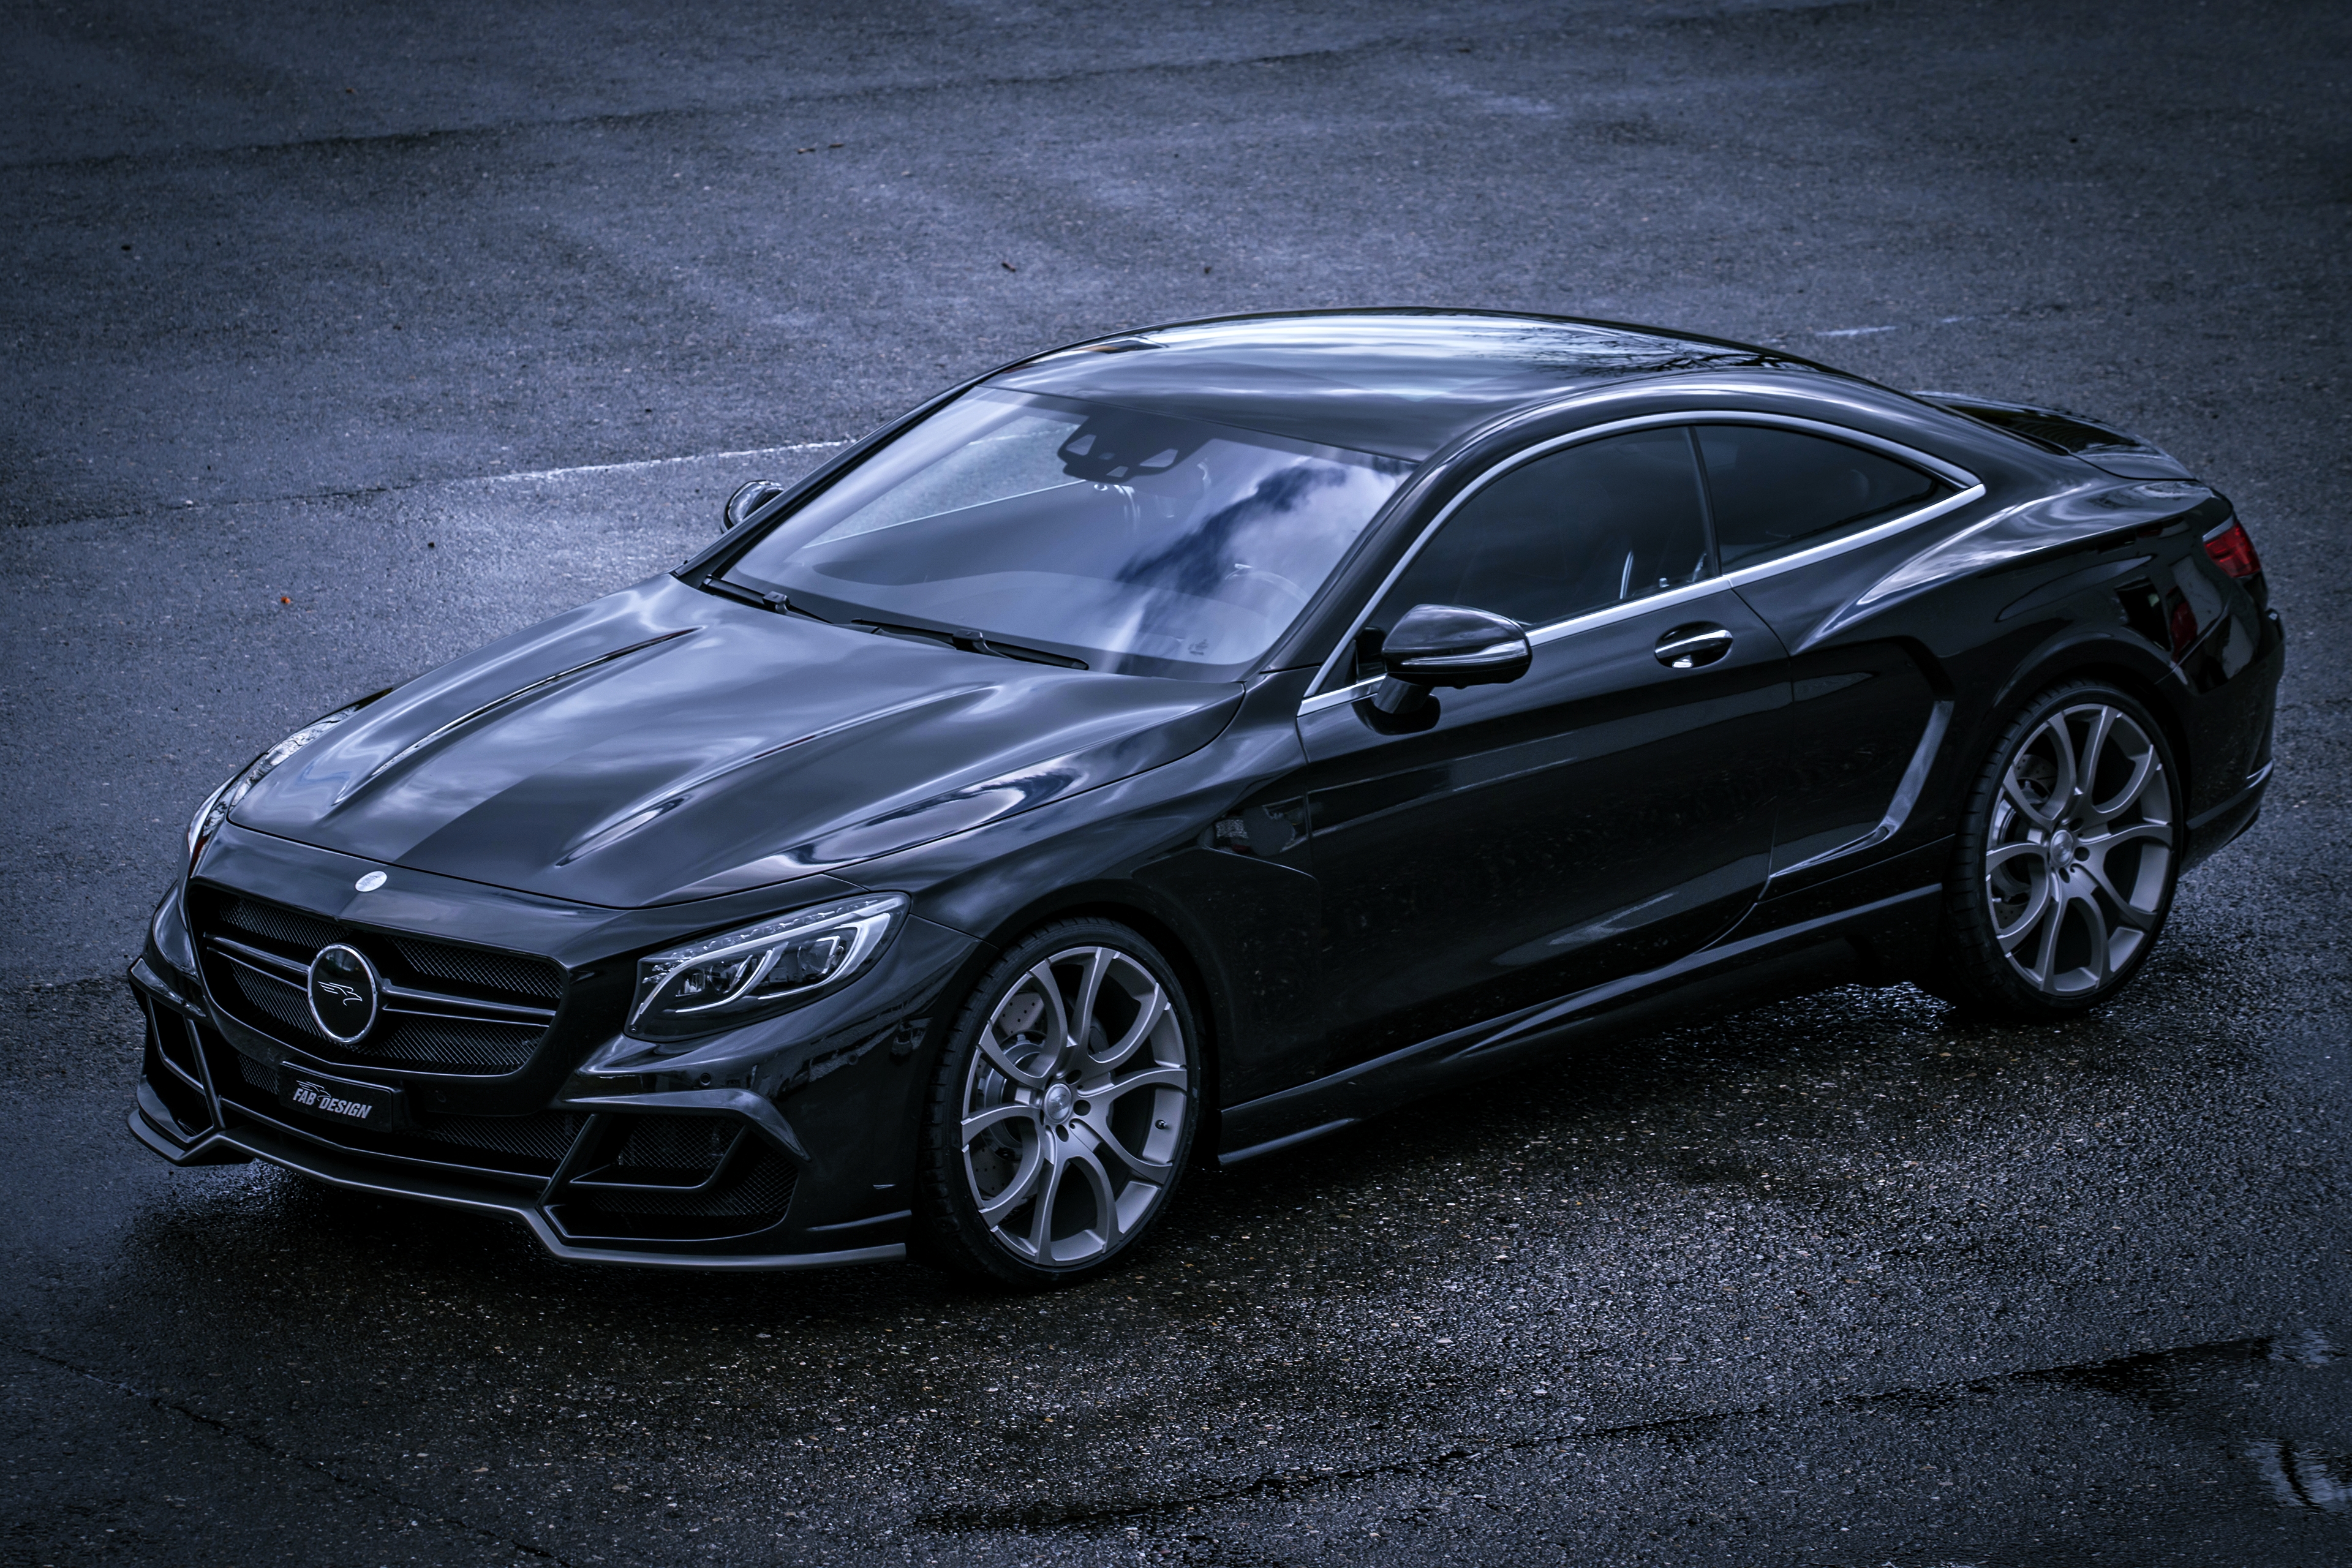 Mercedes-Benz S-Class Coupe Wallpapers, Pictures, Images